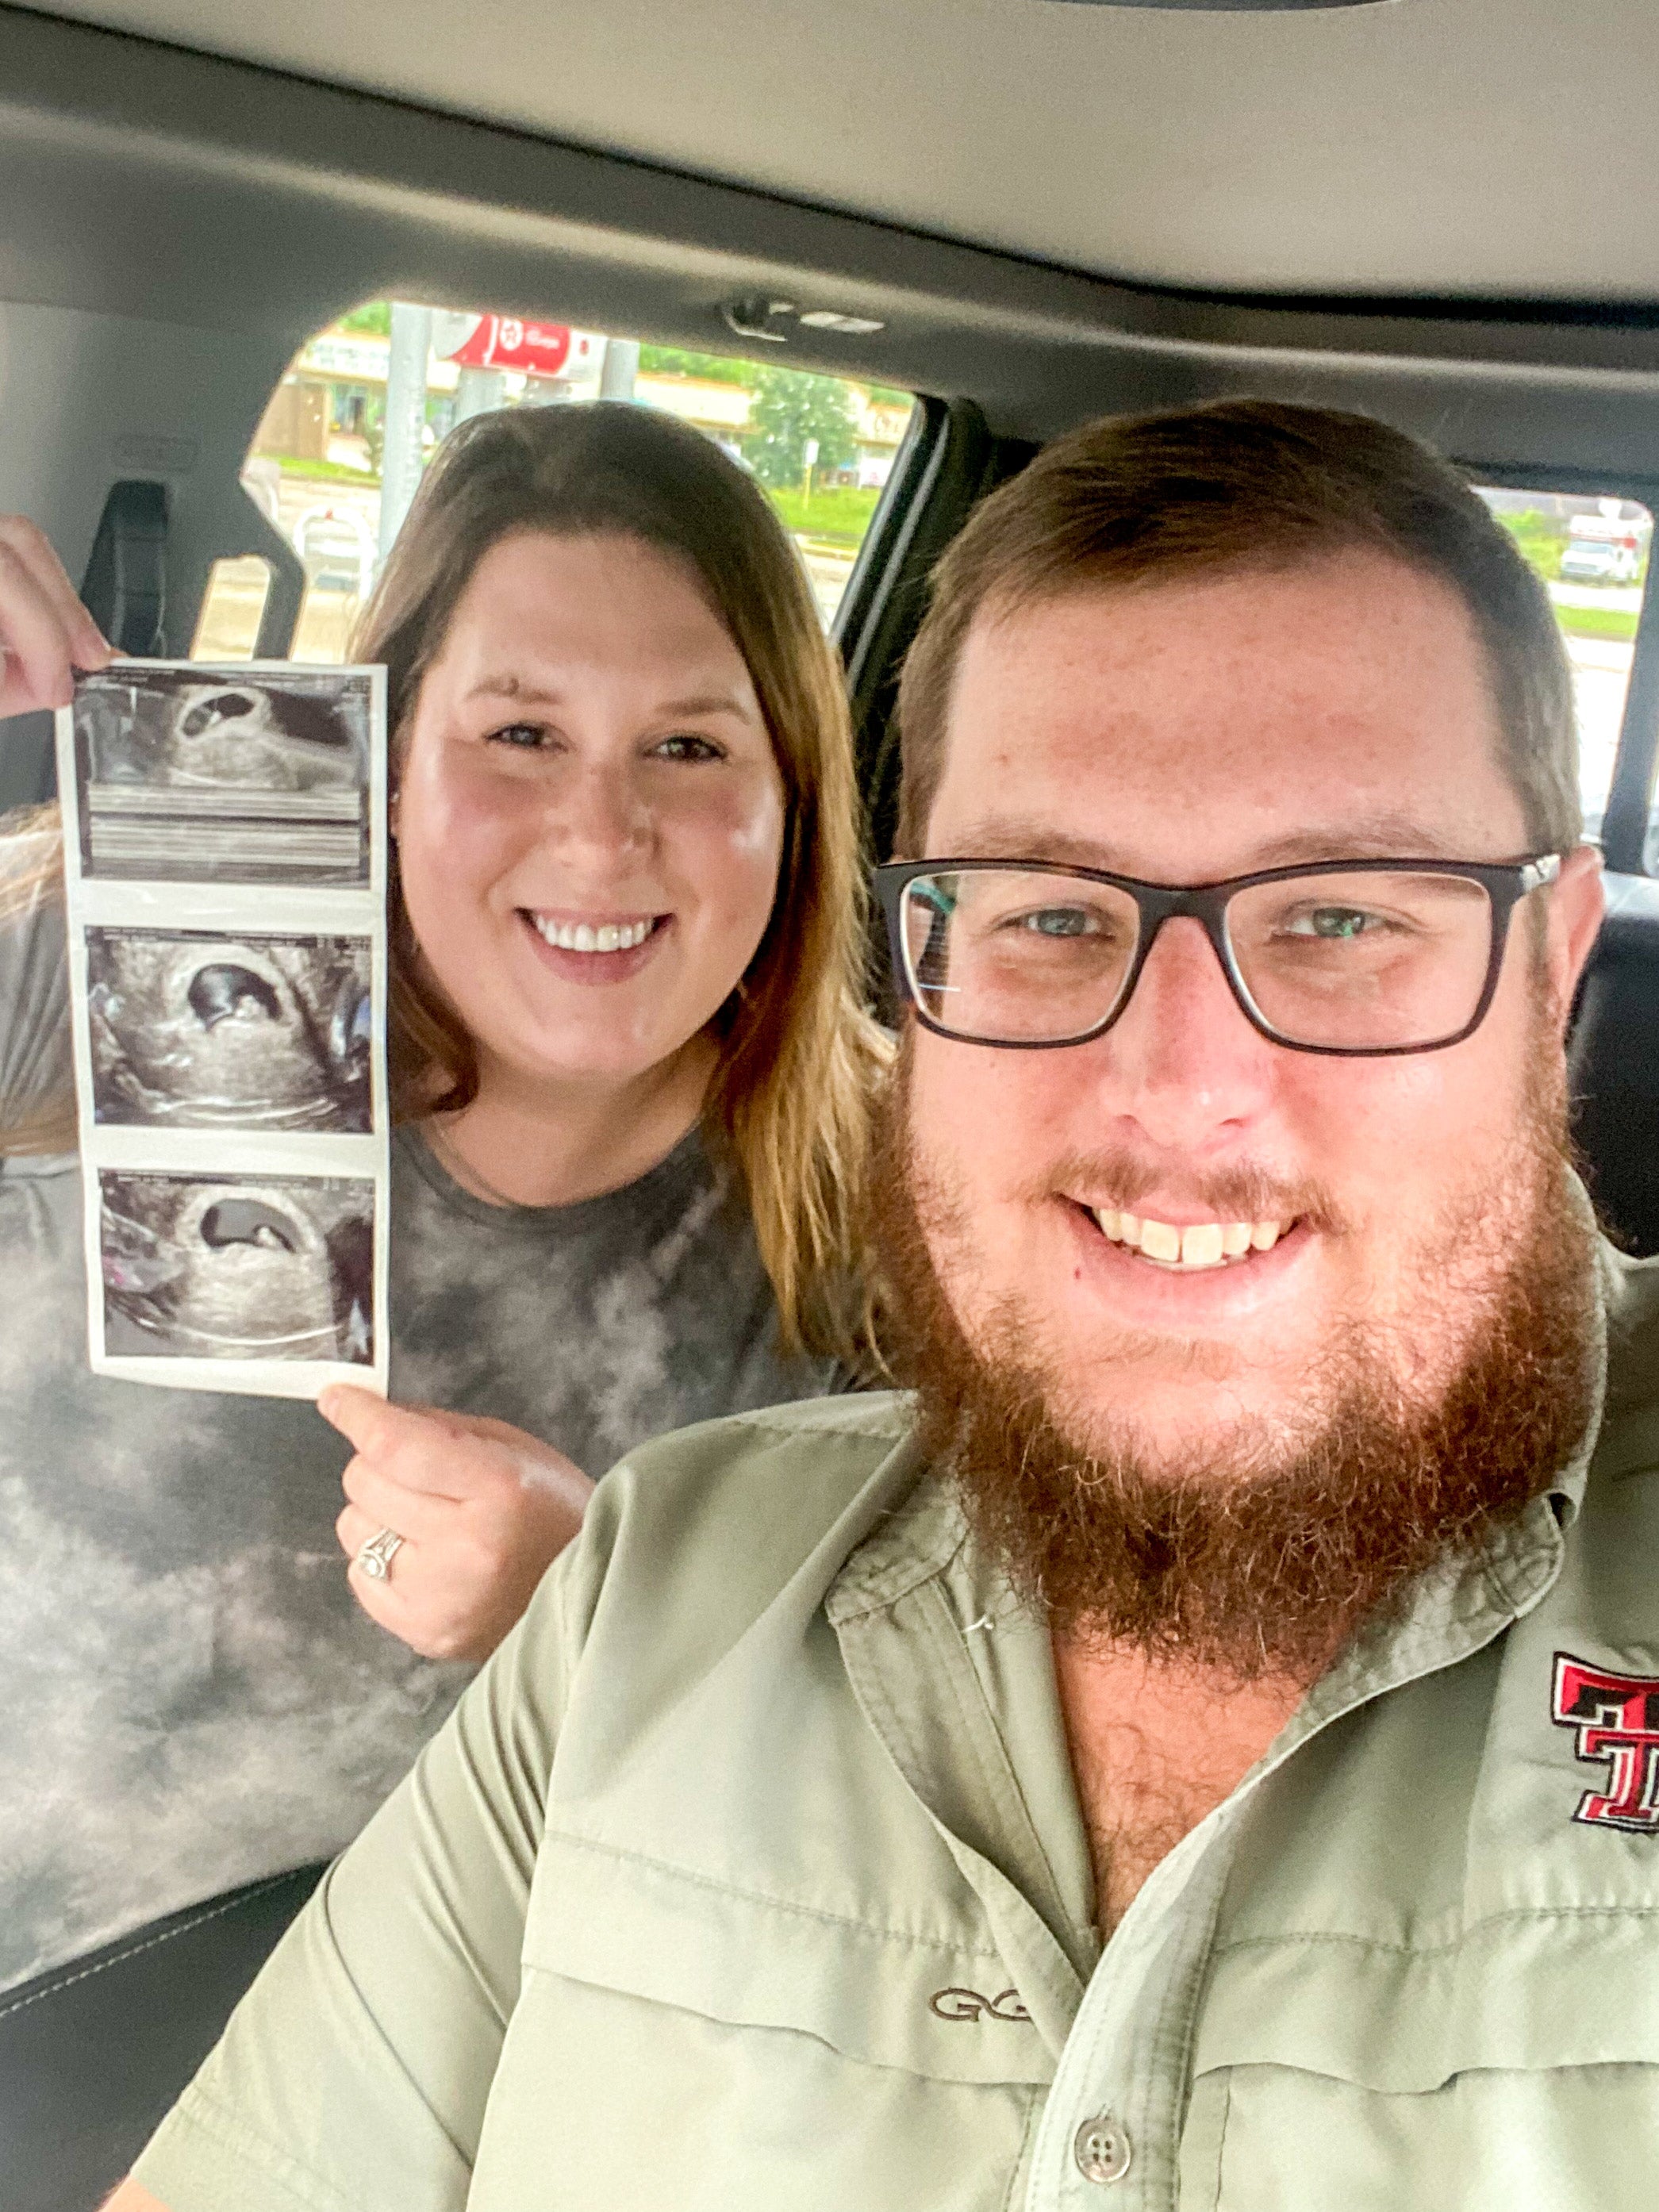 Man and Woman share sonogram of their Mosie Baby in car